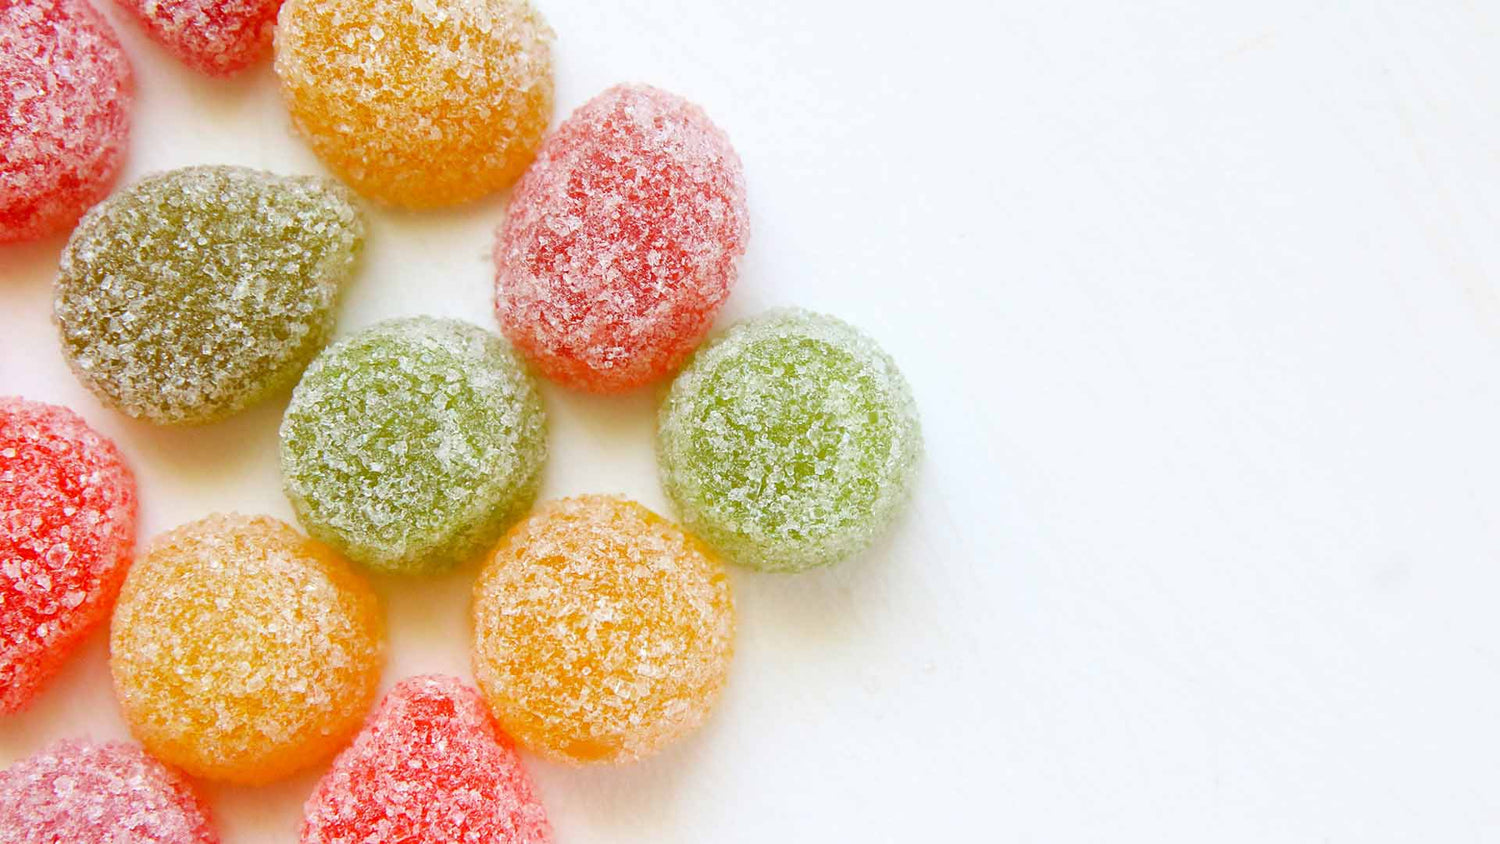 Multicolored gummies on white surface